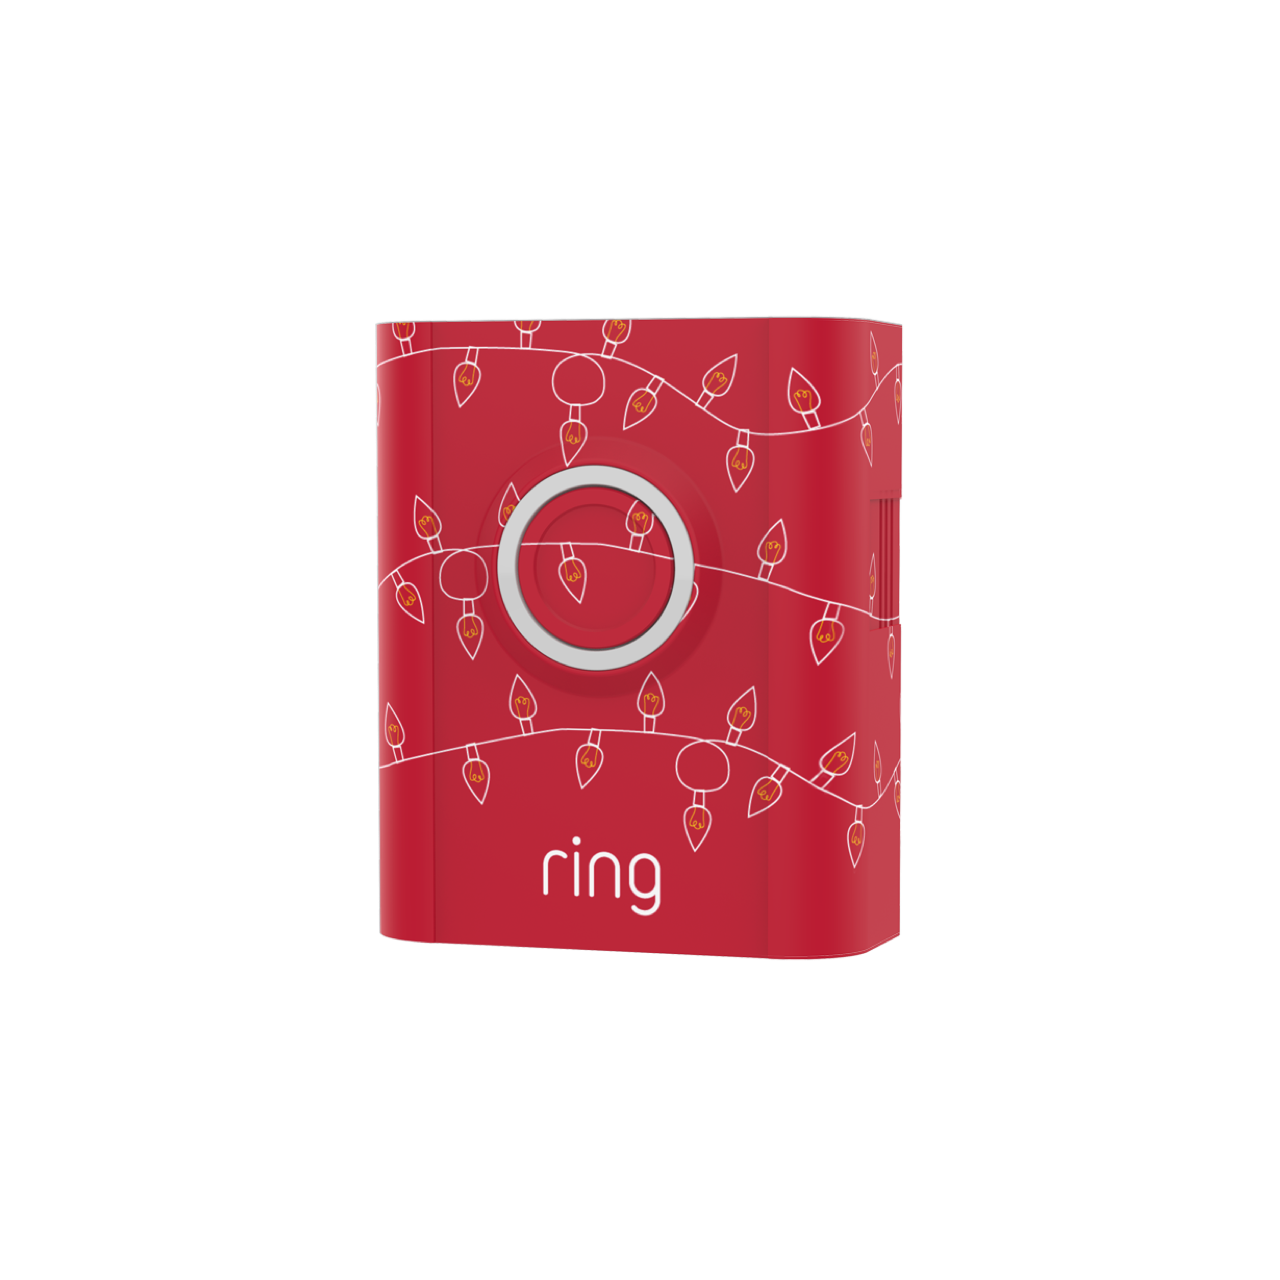 products/holidayfaceplate2021_red__1280x1280_4b221788-0b0f-4fa3-8ac9-9e75f9662572.png